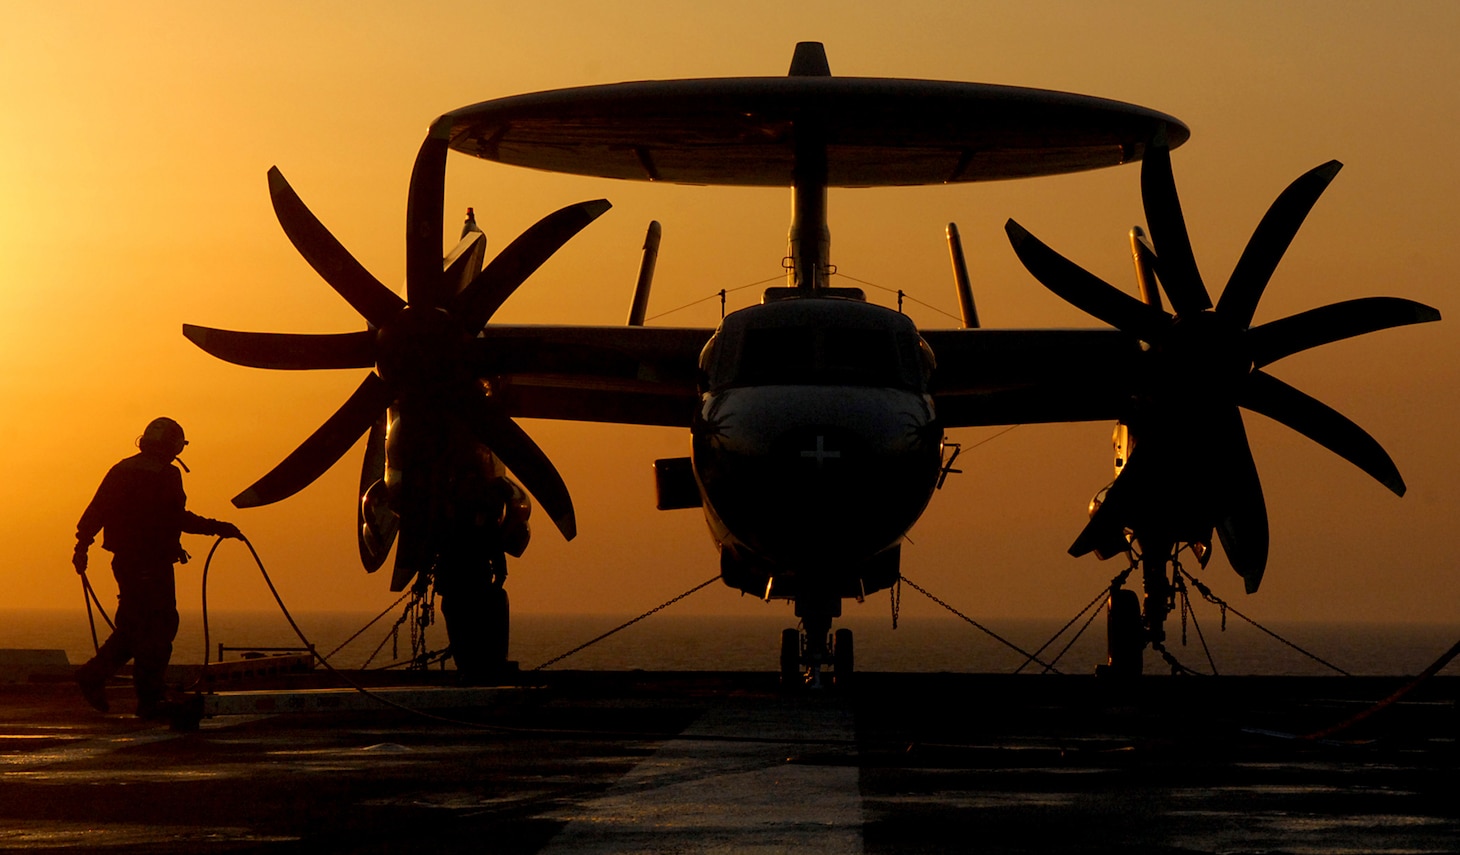 An E-2C Hawkeye is silhouetted on the flight deck of the aircraft carrier USS Harry S. Truman (CVN 75) in the Persian Gulf in March 2008.